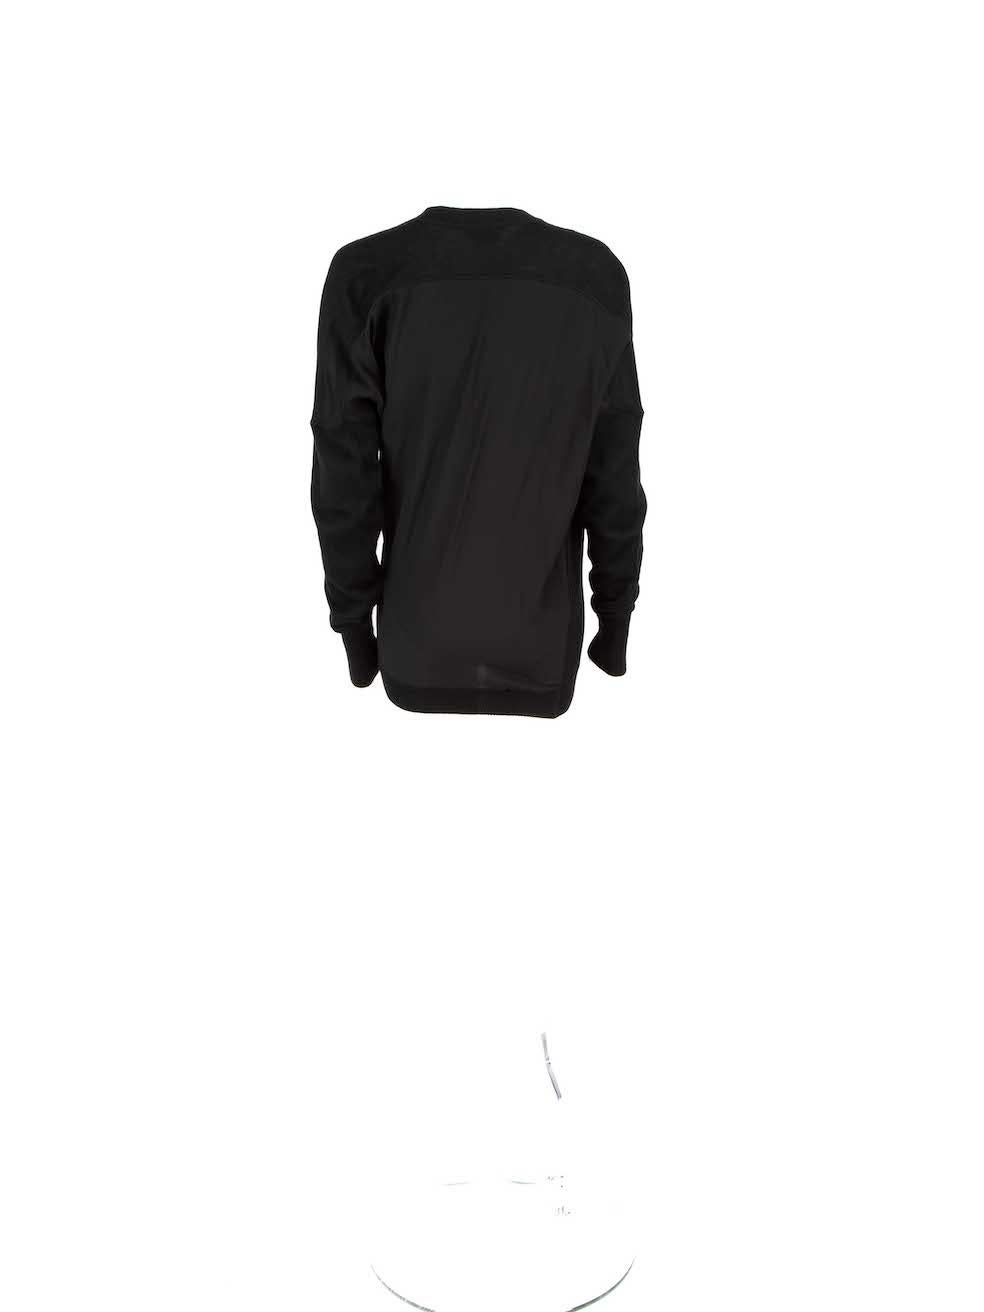 Tom Ford Black Cashmere Draped Jacket Size L In Good Condition For Sale In London, GB